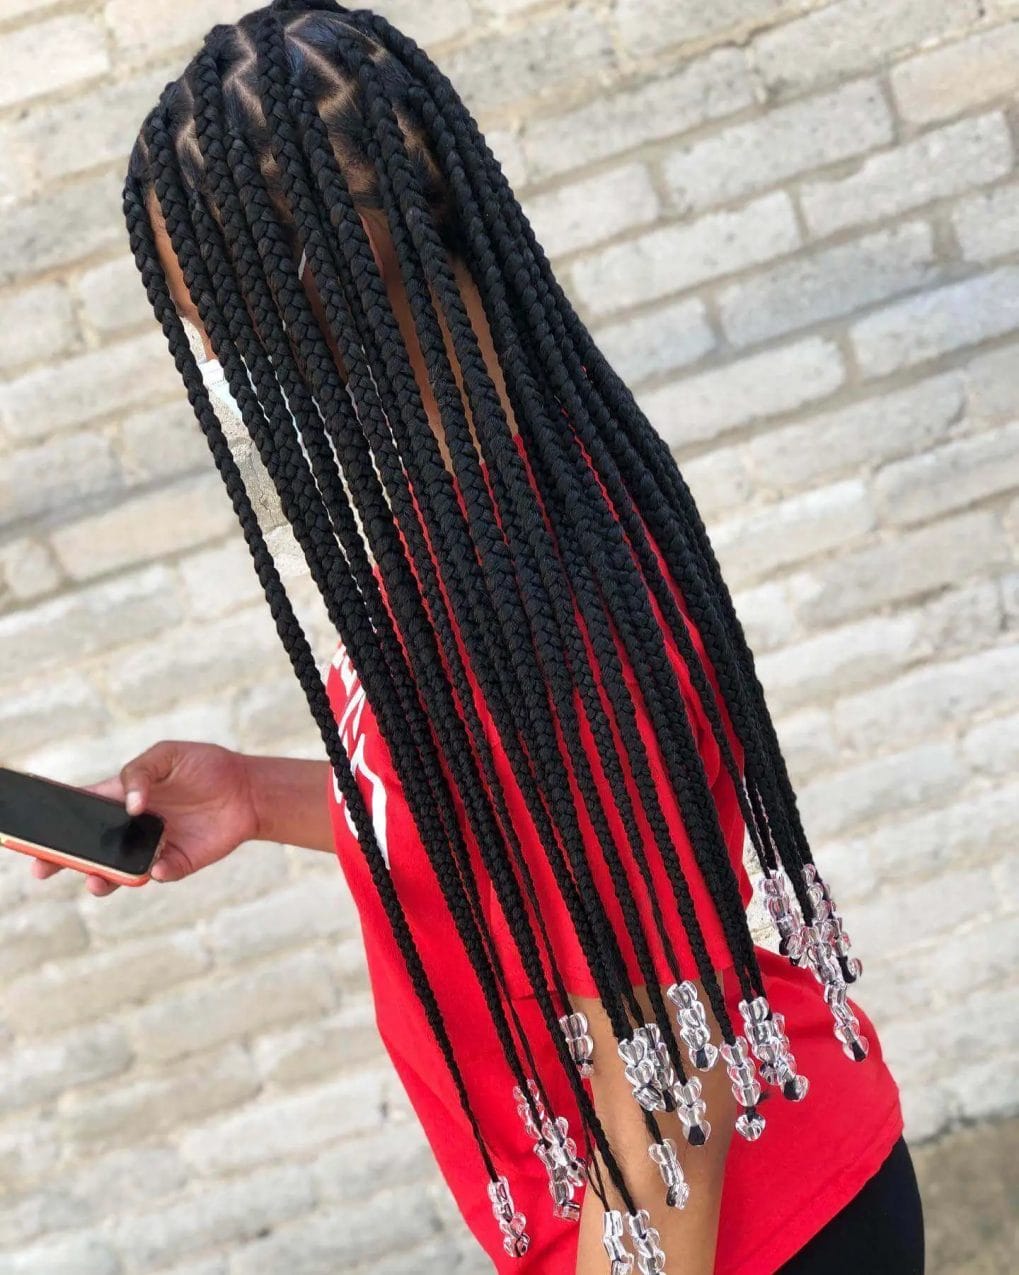 Thick, long black braids enhanced with transparent cylindrical beads.